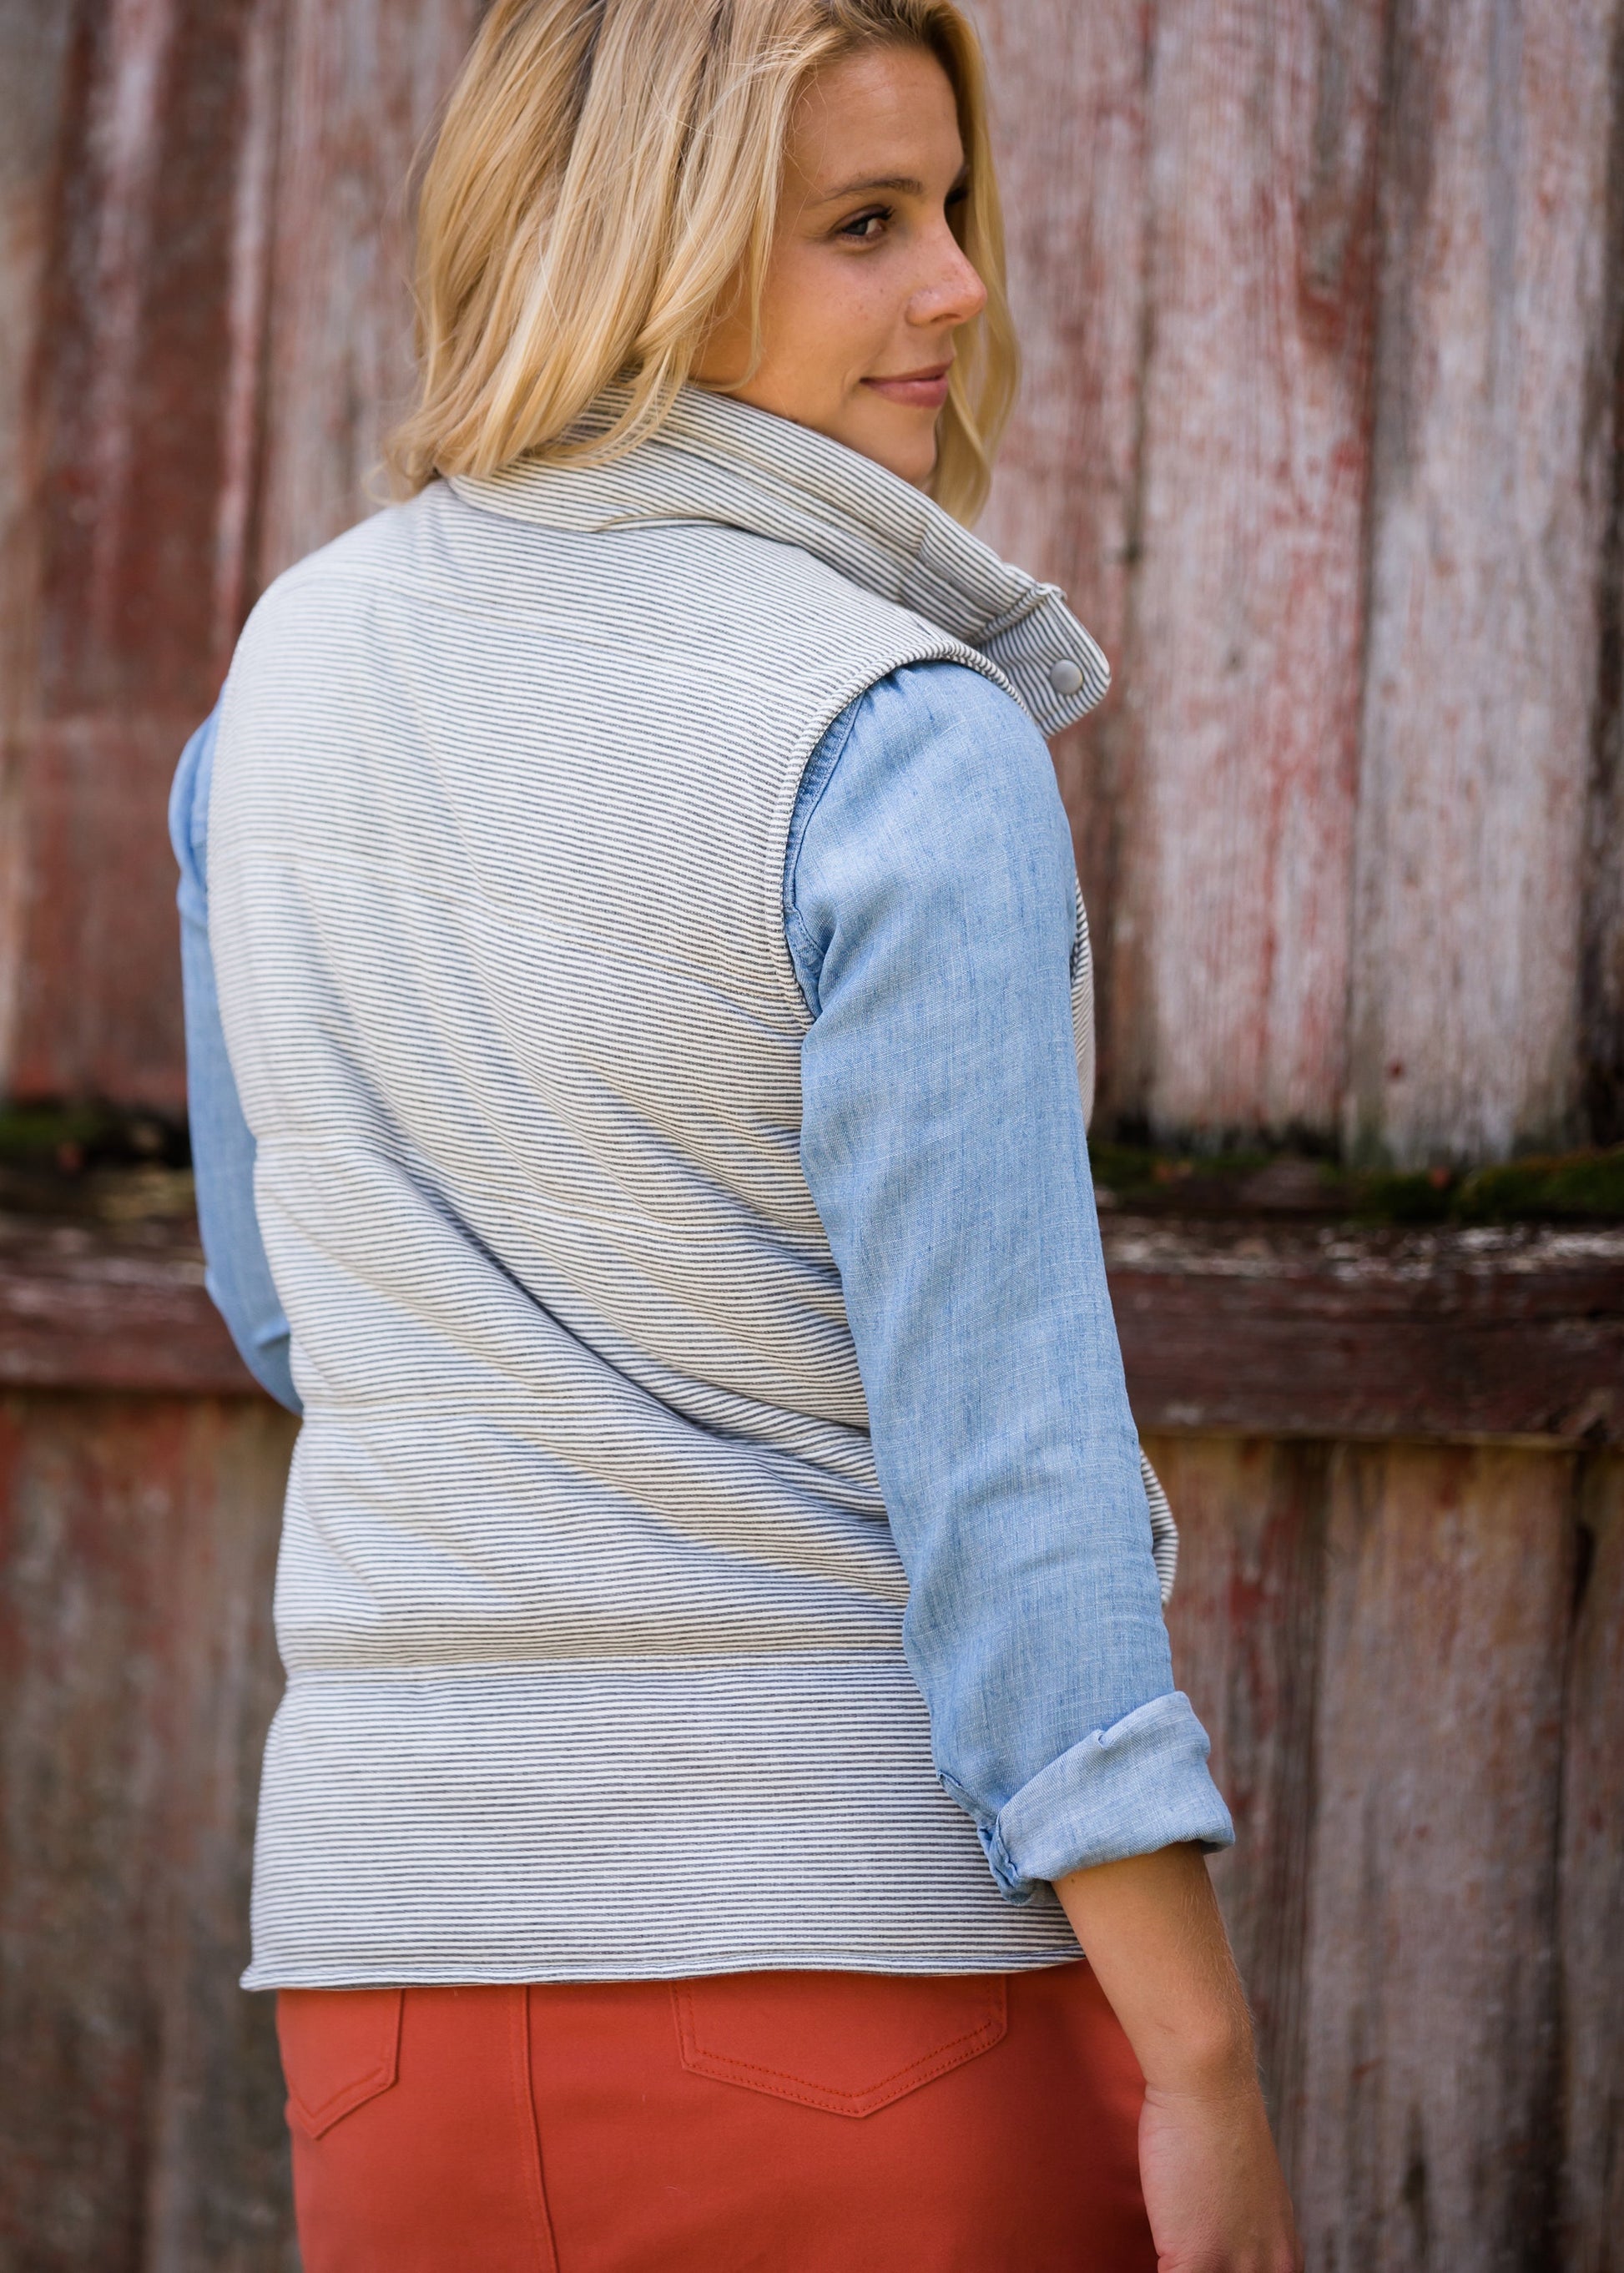 Pin Striped Sherpa Lined Vest